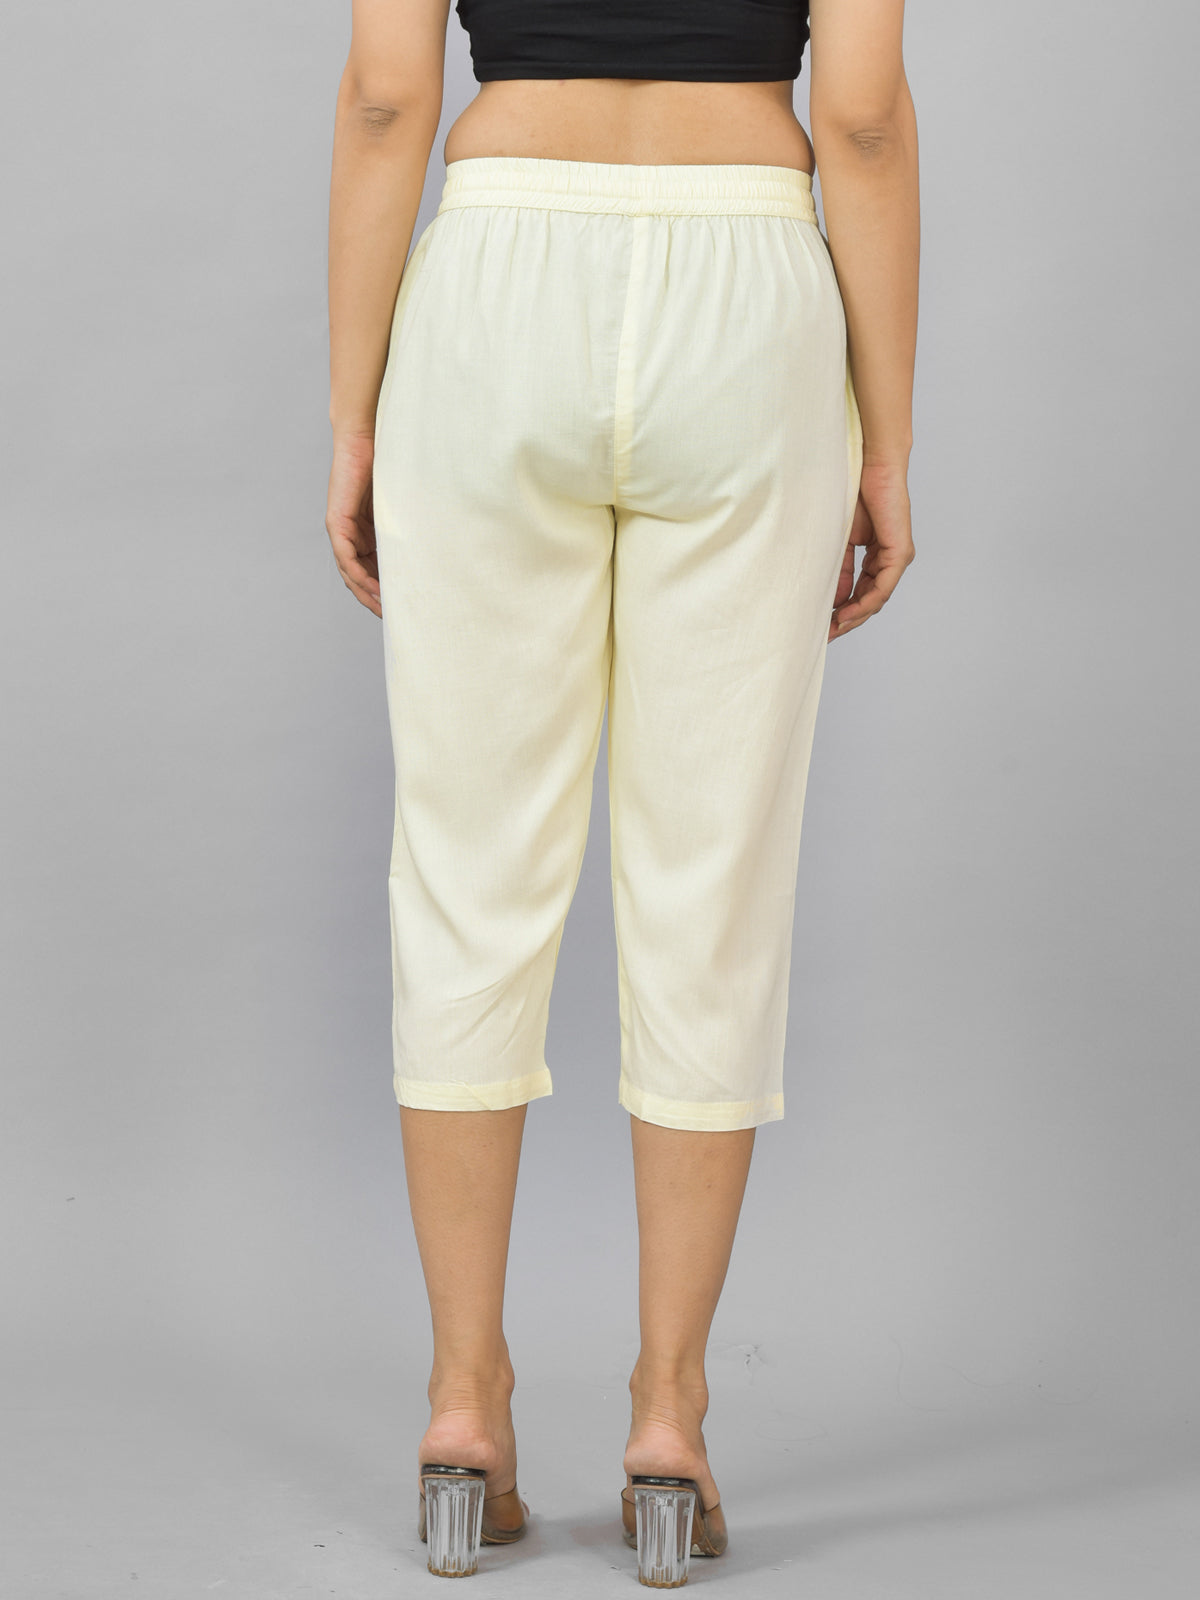 Pack Of 2 Womens Beige And Gajri Calf Length Rayon Culottes Trouser Combo